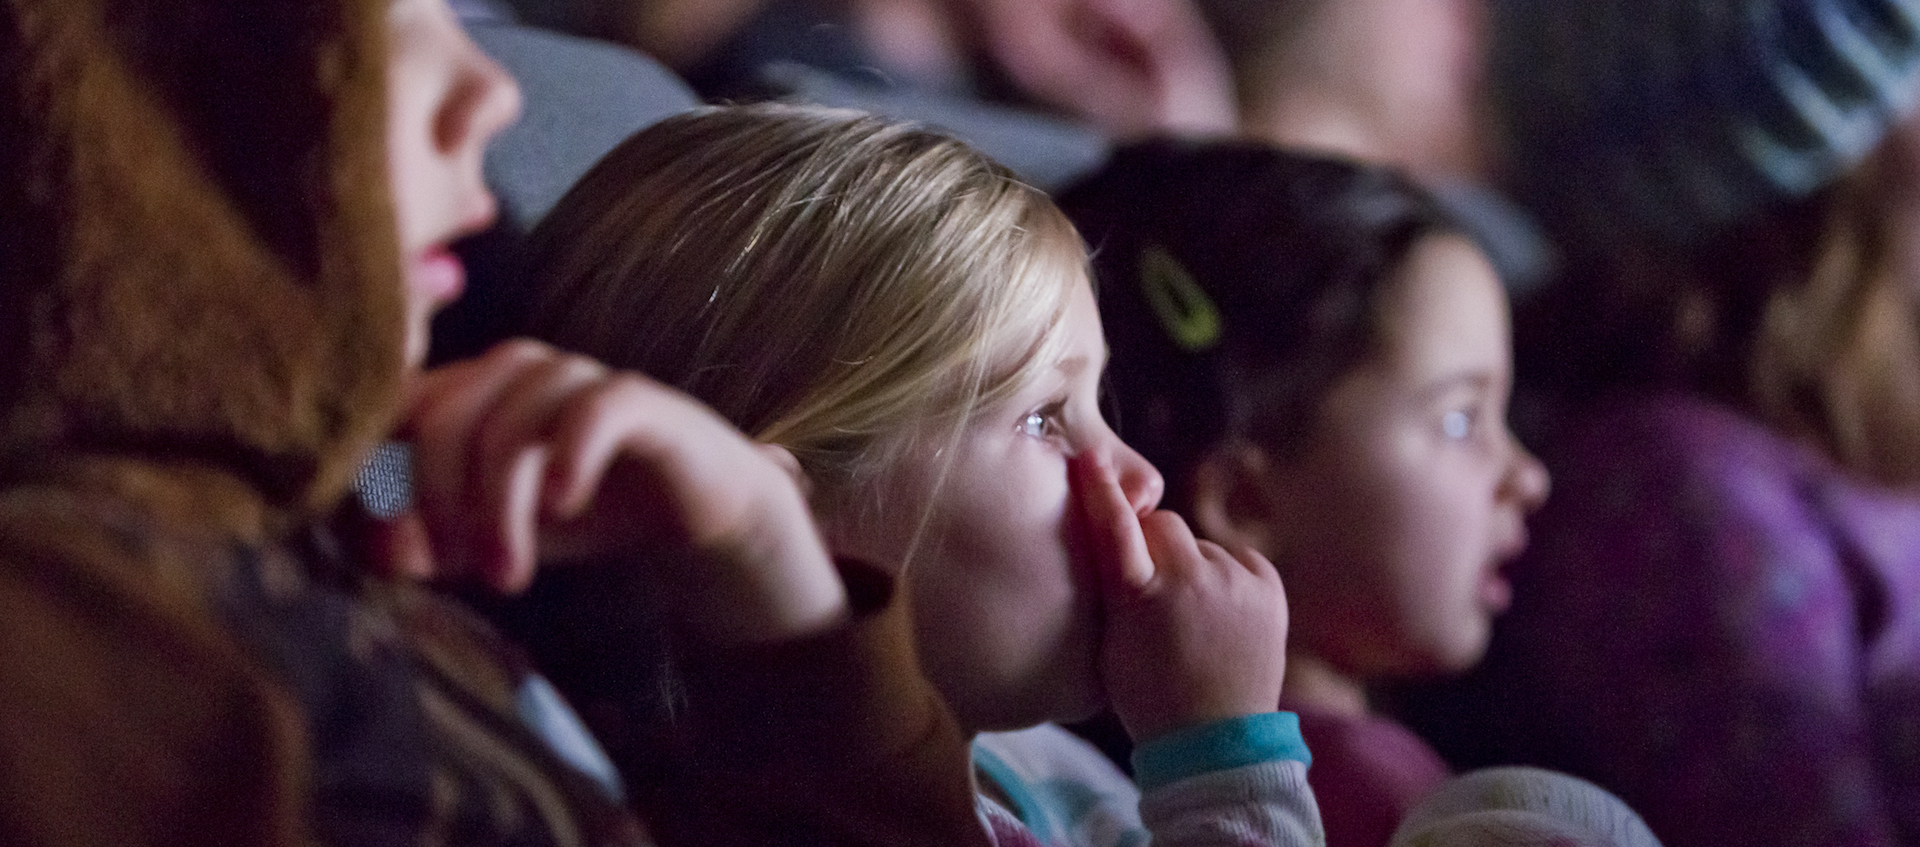 Young children watching a movie in the Wexner Center for the Arts Film/Video Theater during the Zoom: Family Film Festival in December 2017